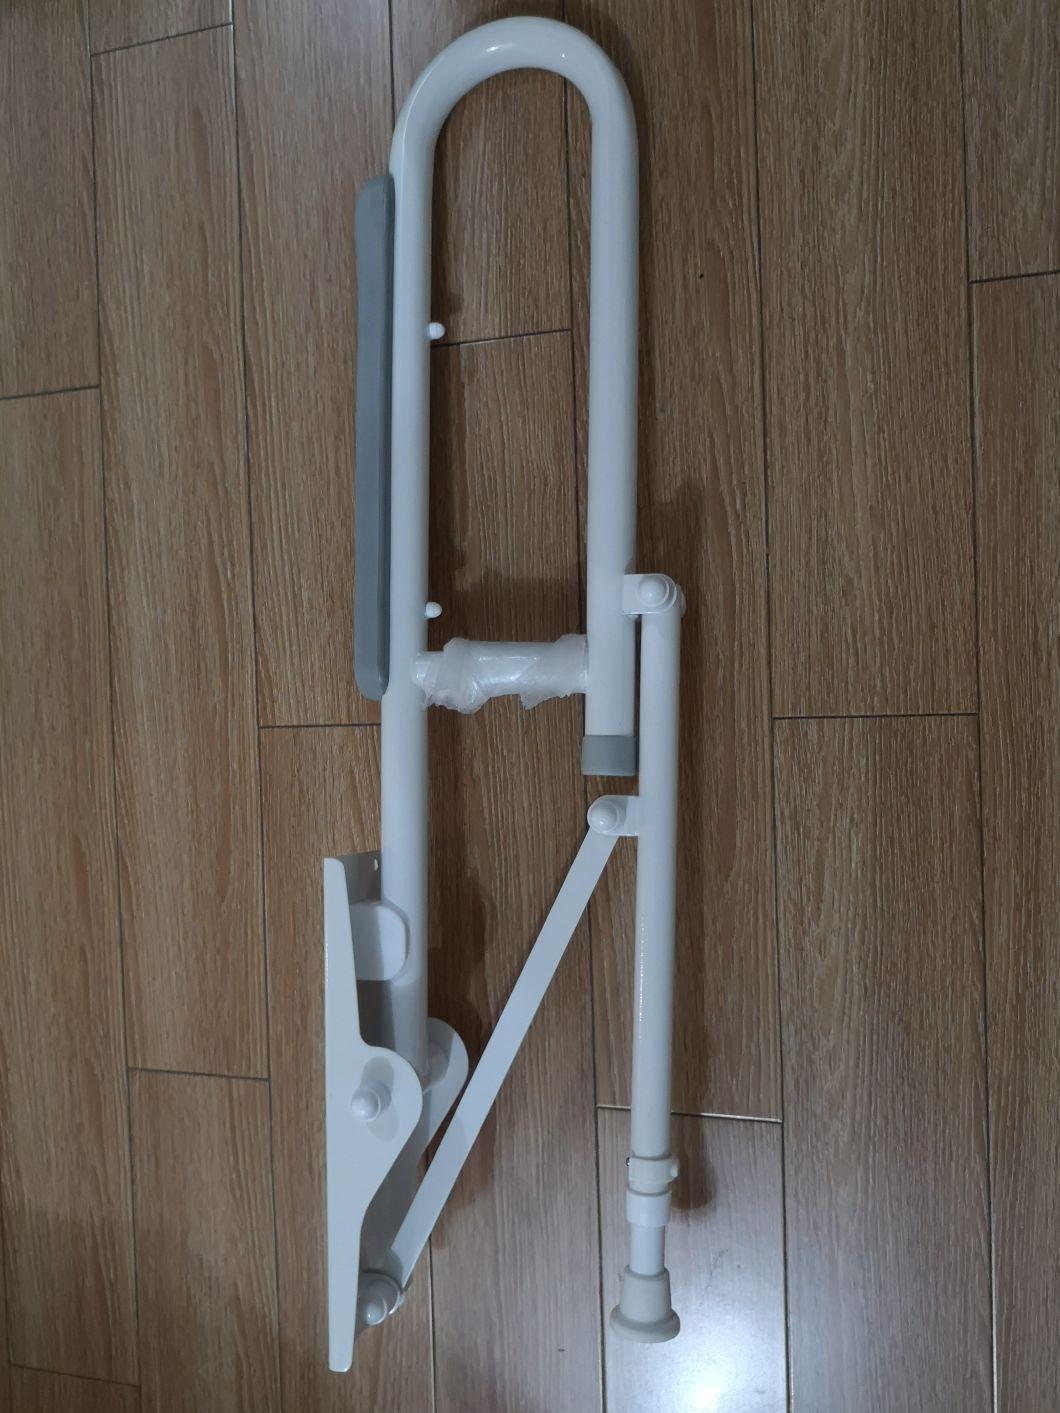 Lw-Ai-T Foldable Handrail for Barrier-Free Purpose